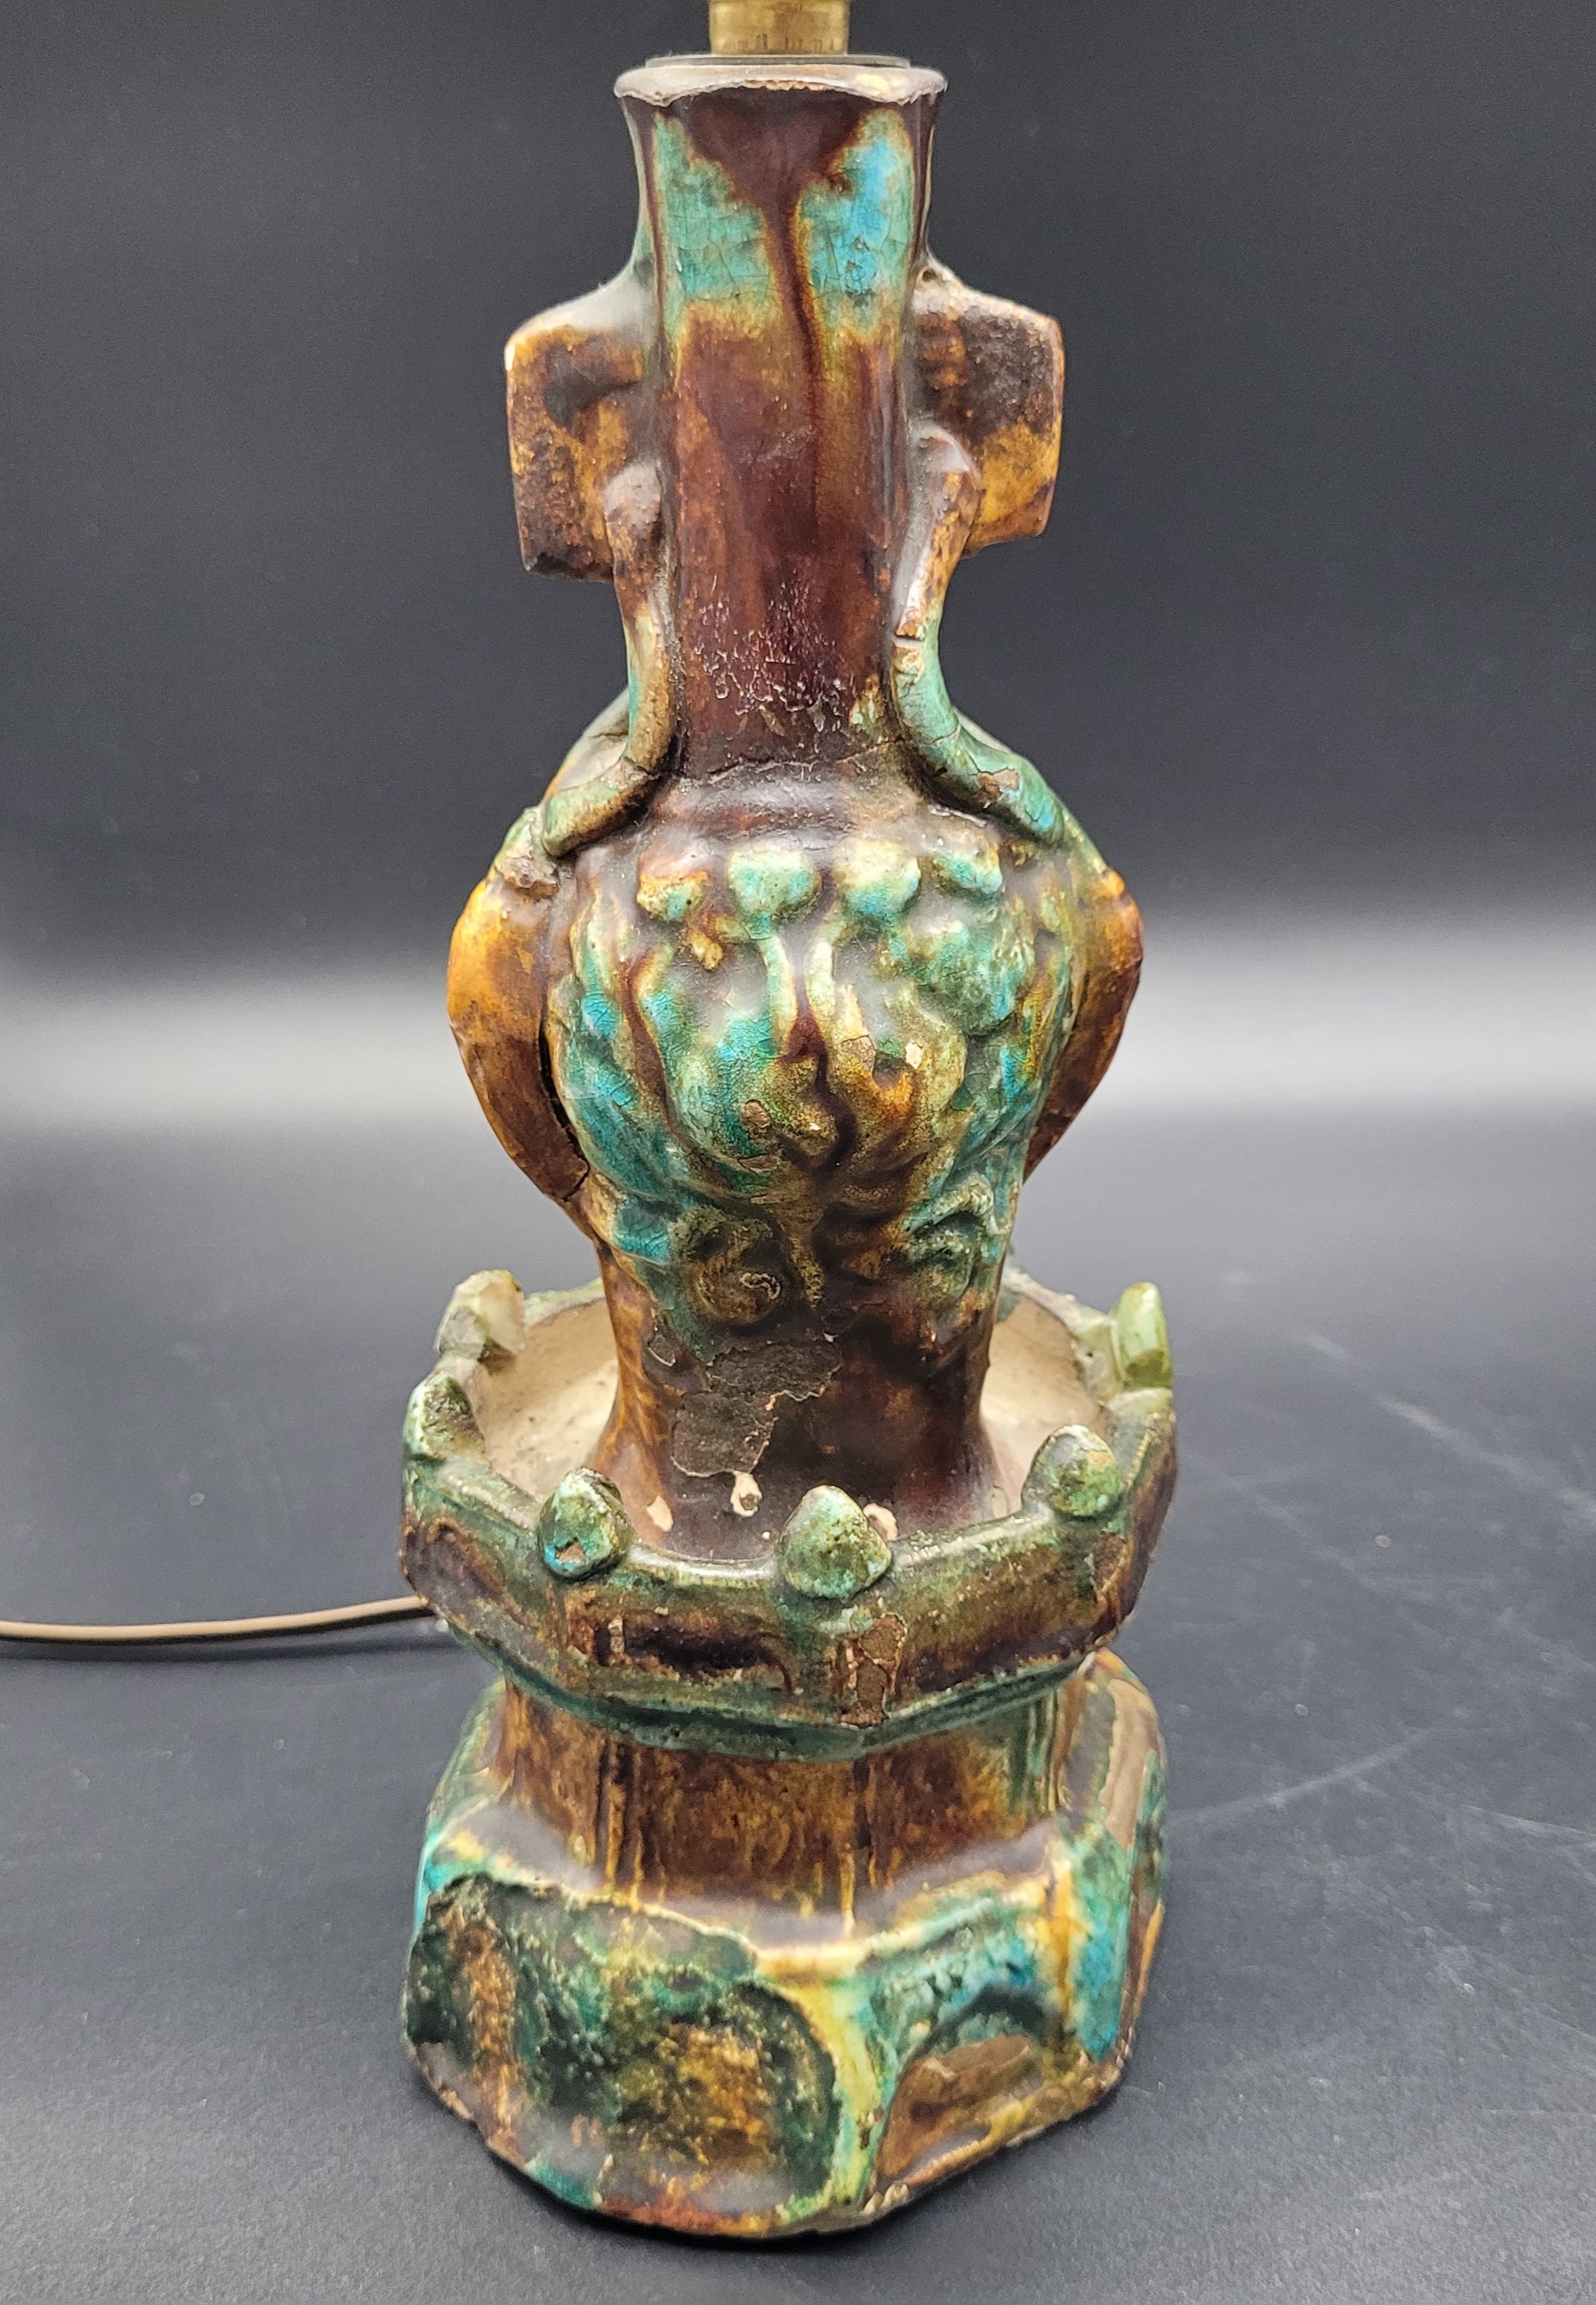 Online Antiques Store Chinese Ming Dynasty Pottery Candle Sticks 16th / 17th Century